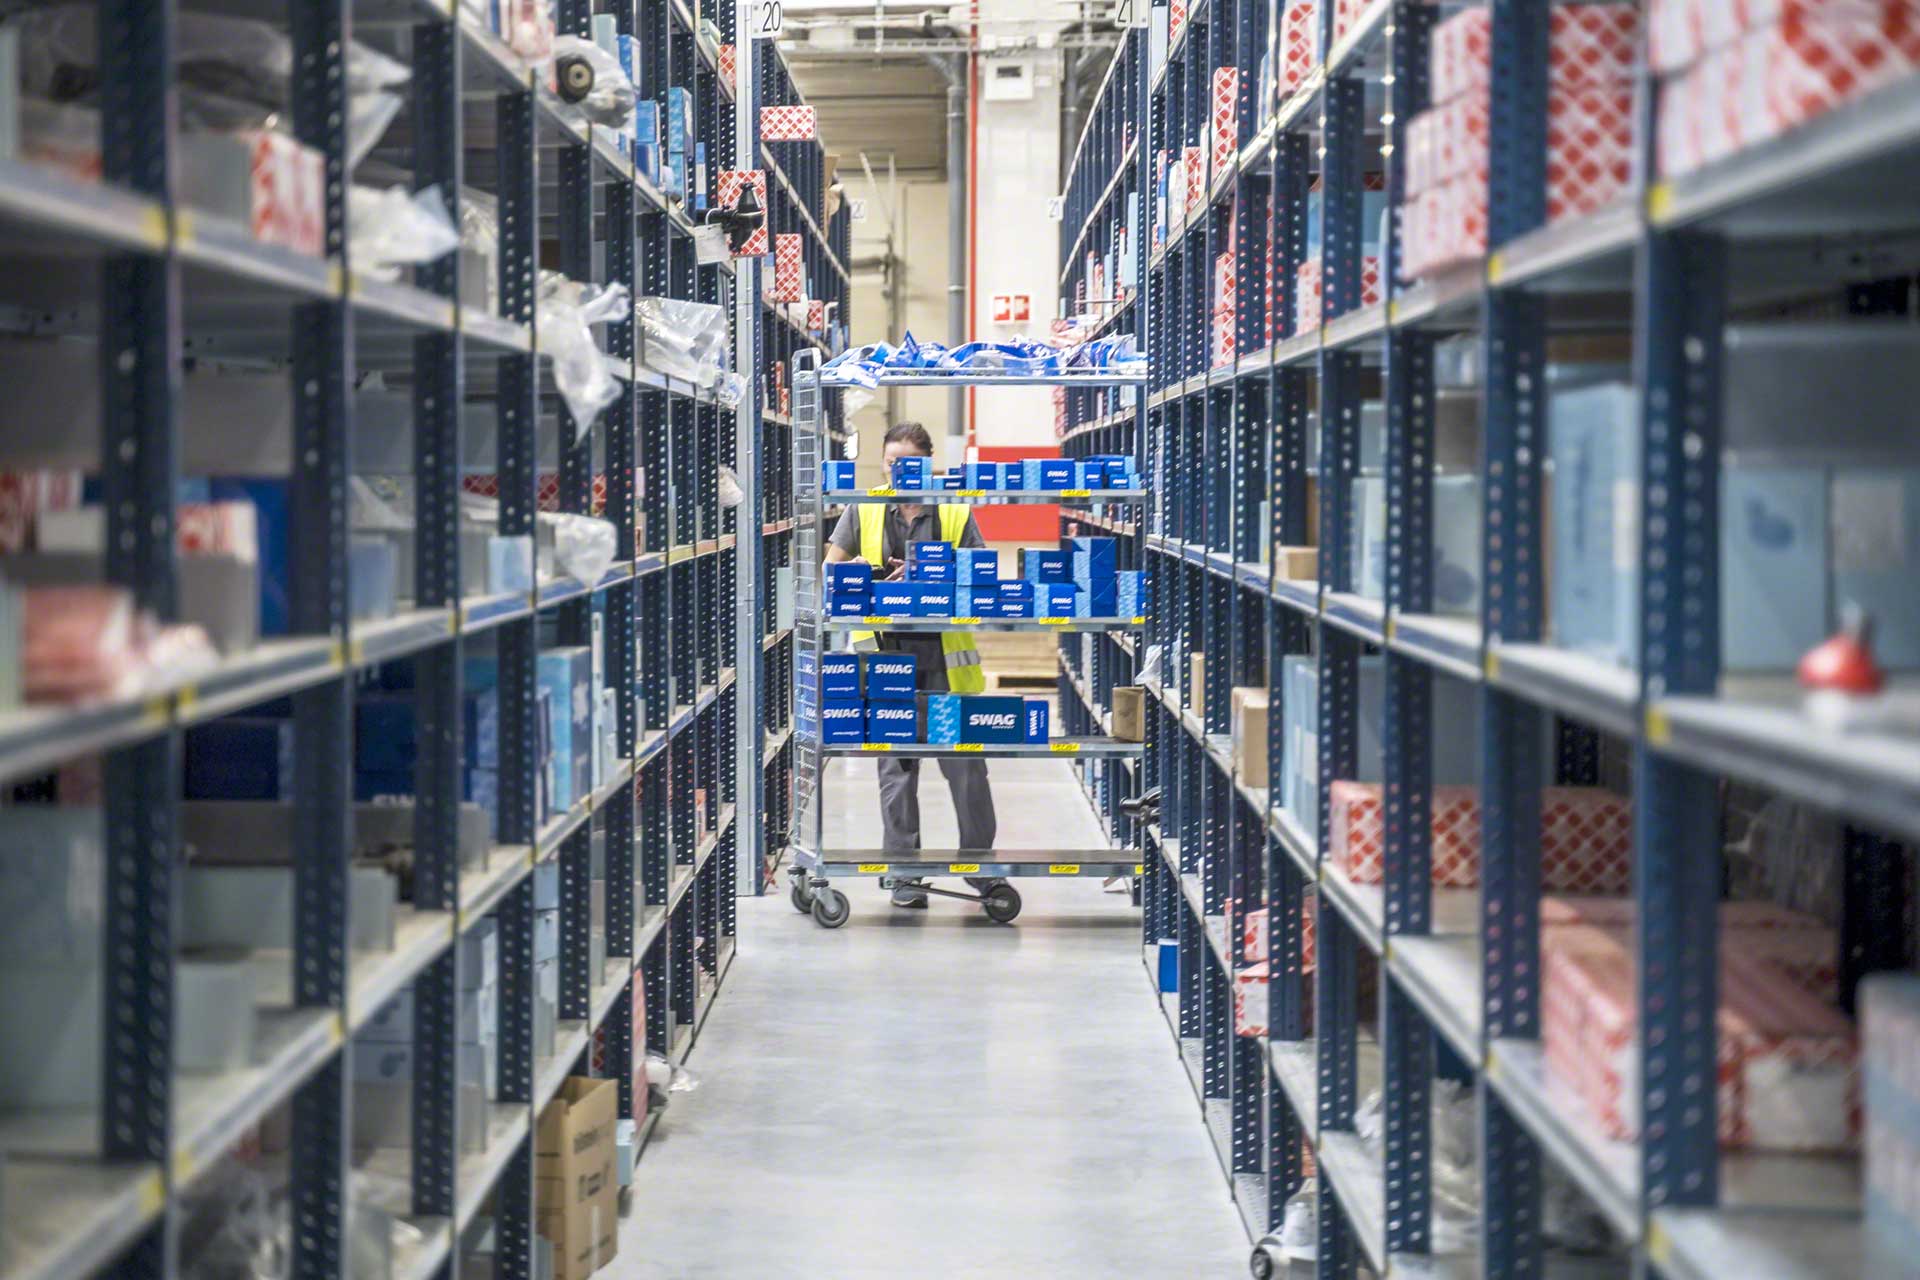 According to the person-to-product criterion, operators move around the warehouse to pick the products that make up each order